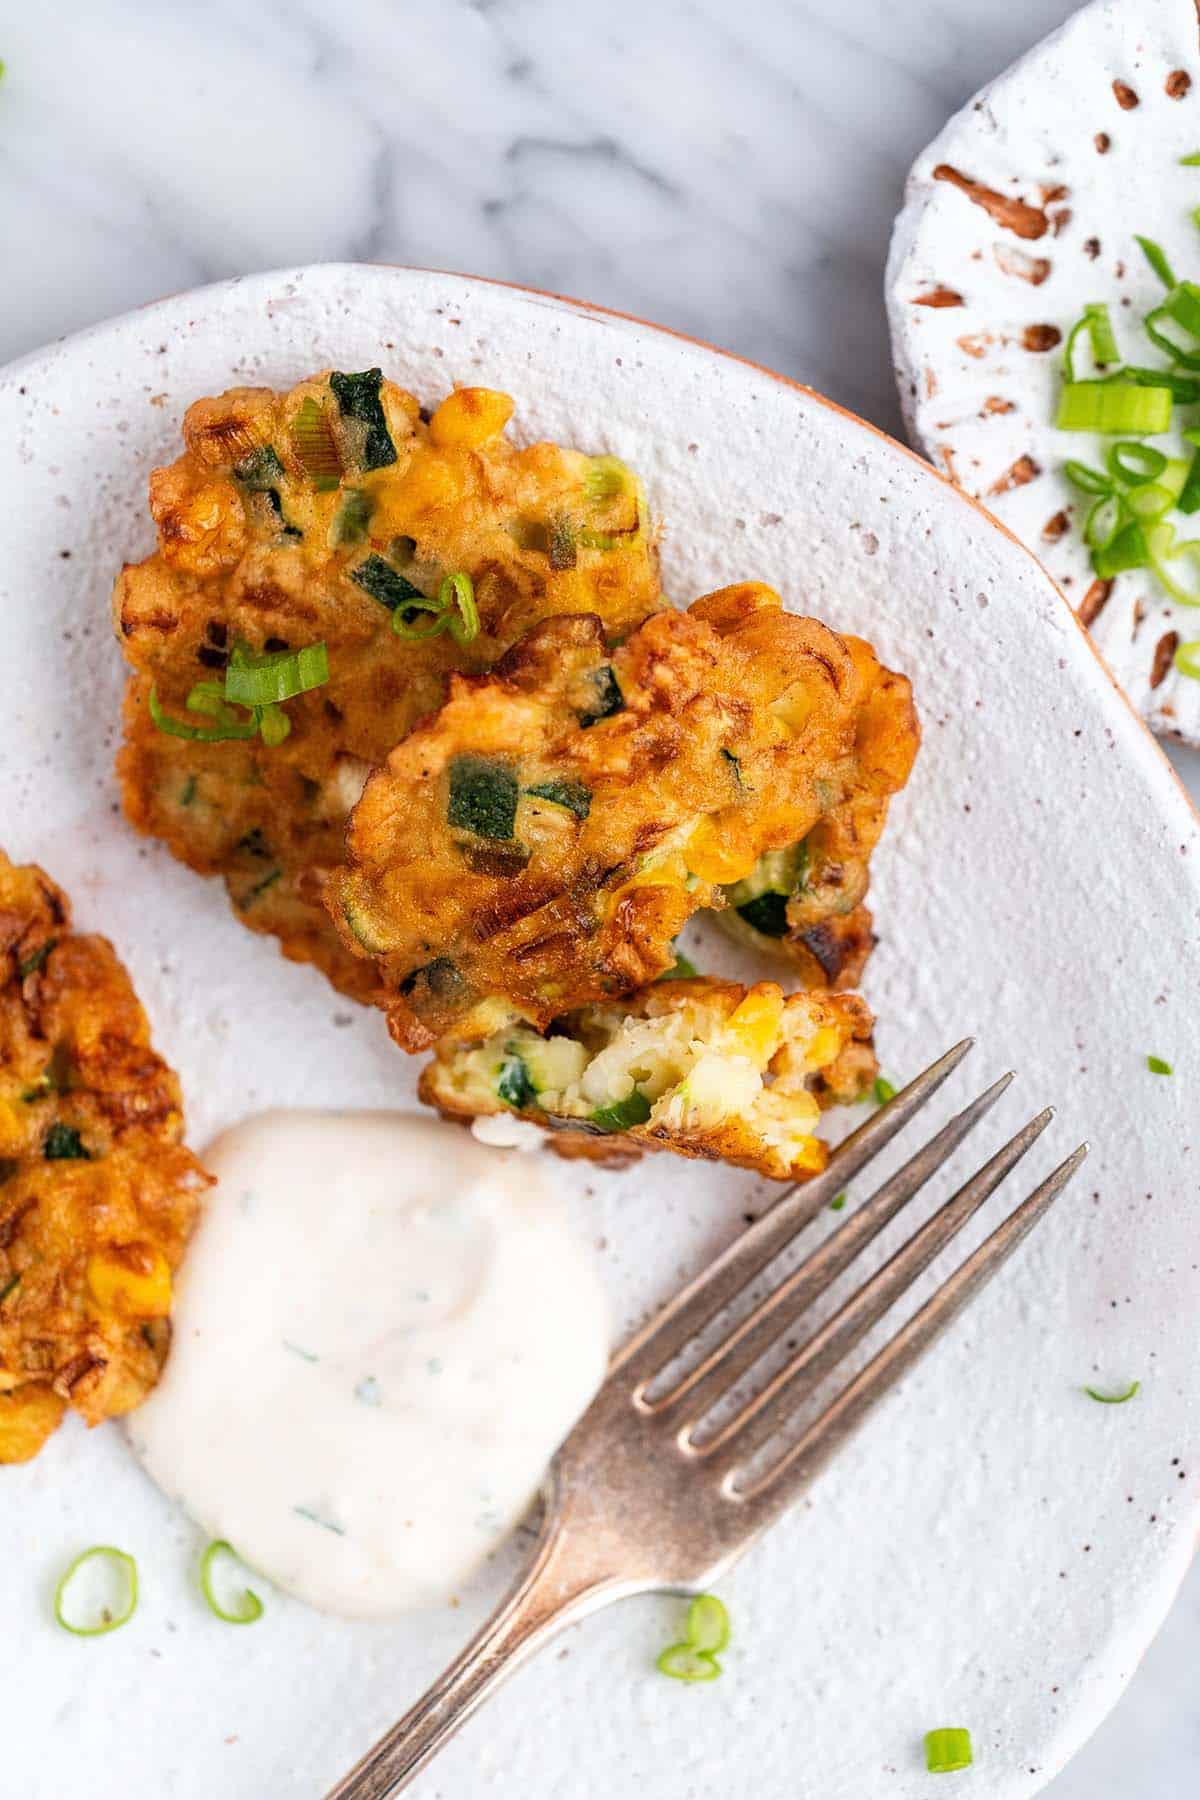 crispy veg fritters with creamy garlic sauce on plate with one fritter bitten to show inside